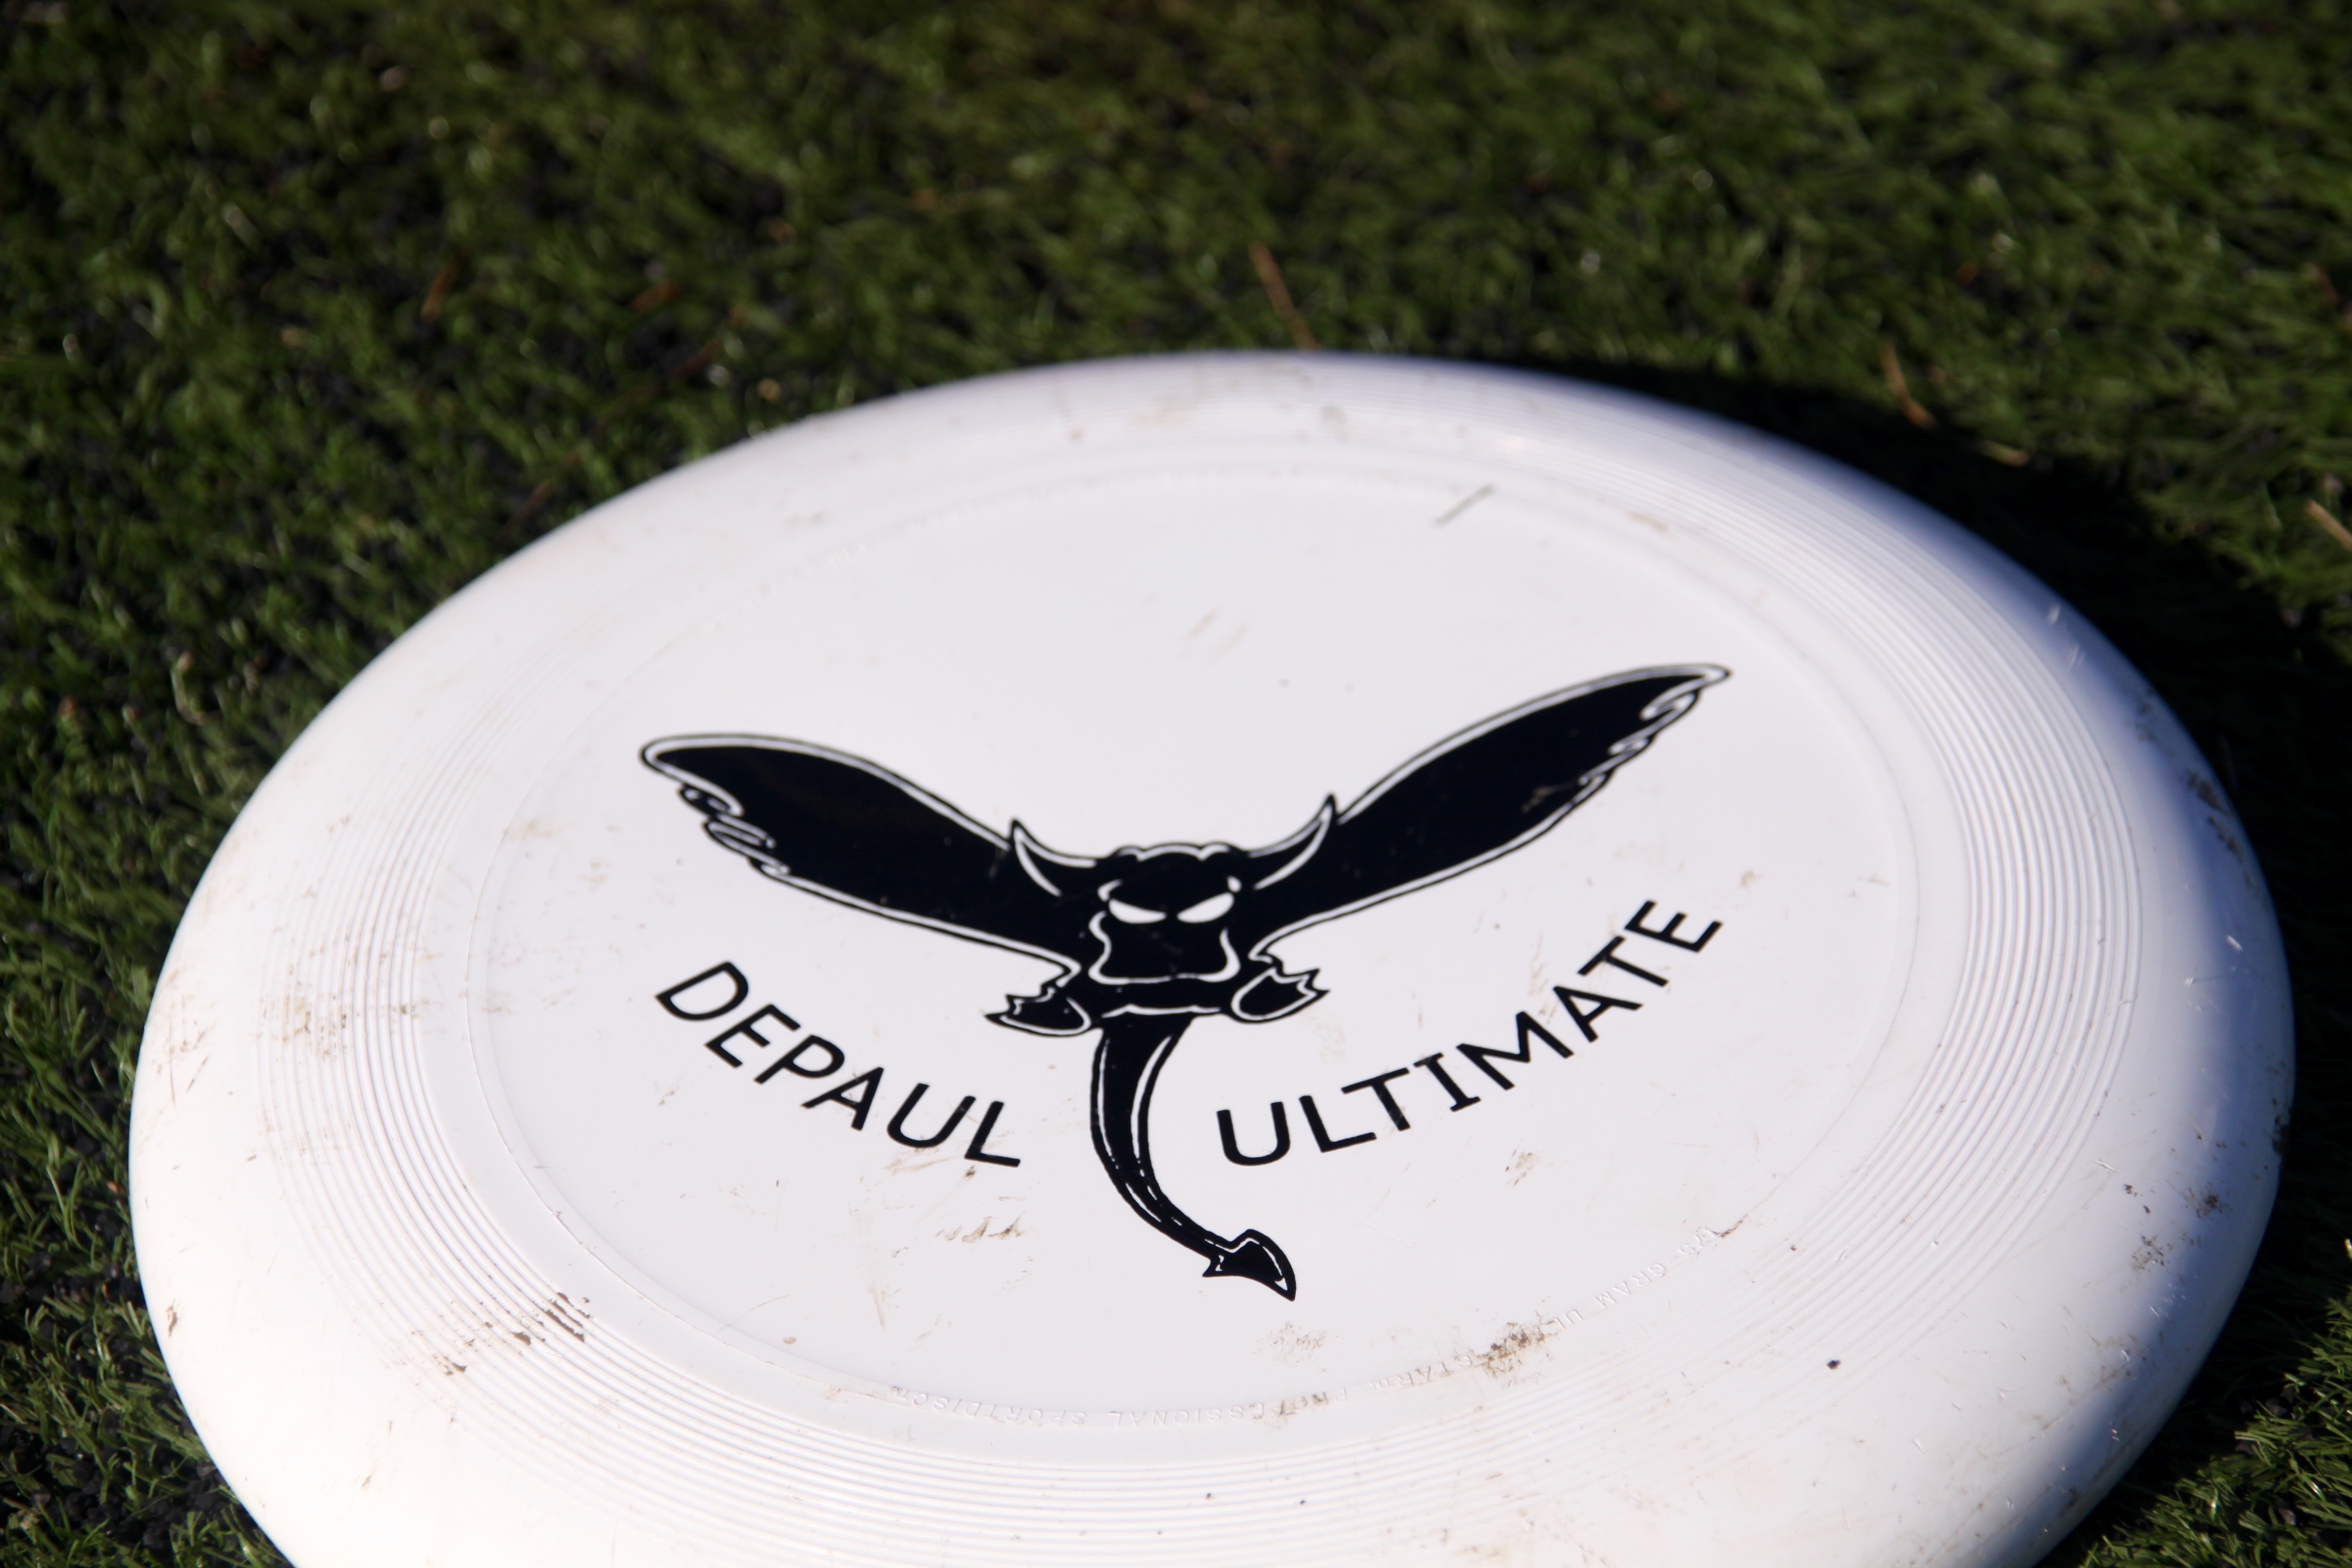 One of the nearly dozen Frisbees in use during the DePaul Ultimate Club practice on Jan. 21, 2017. (Photo/Ben Rains)